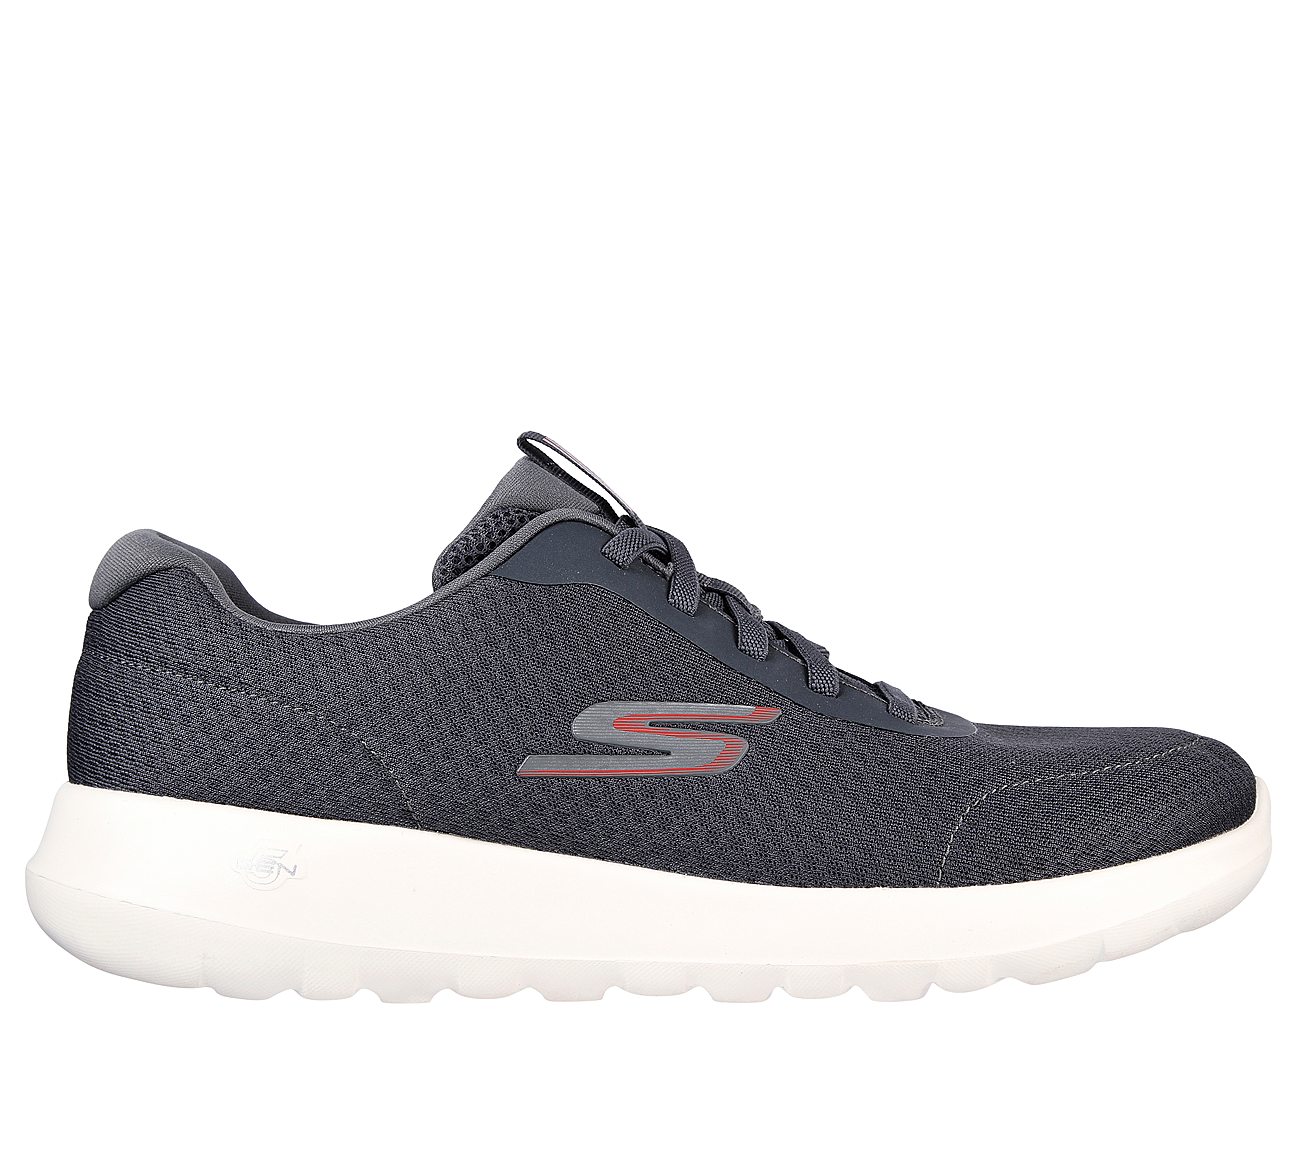 GO WALK MAX - MIDSHORE, CHARCOAL/RED Footwear Lateral View